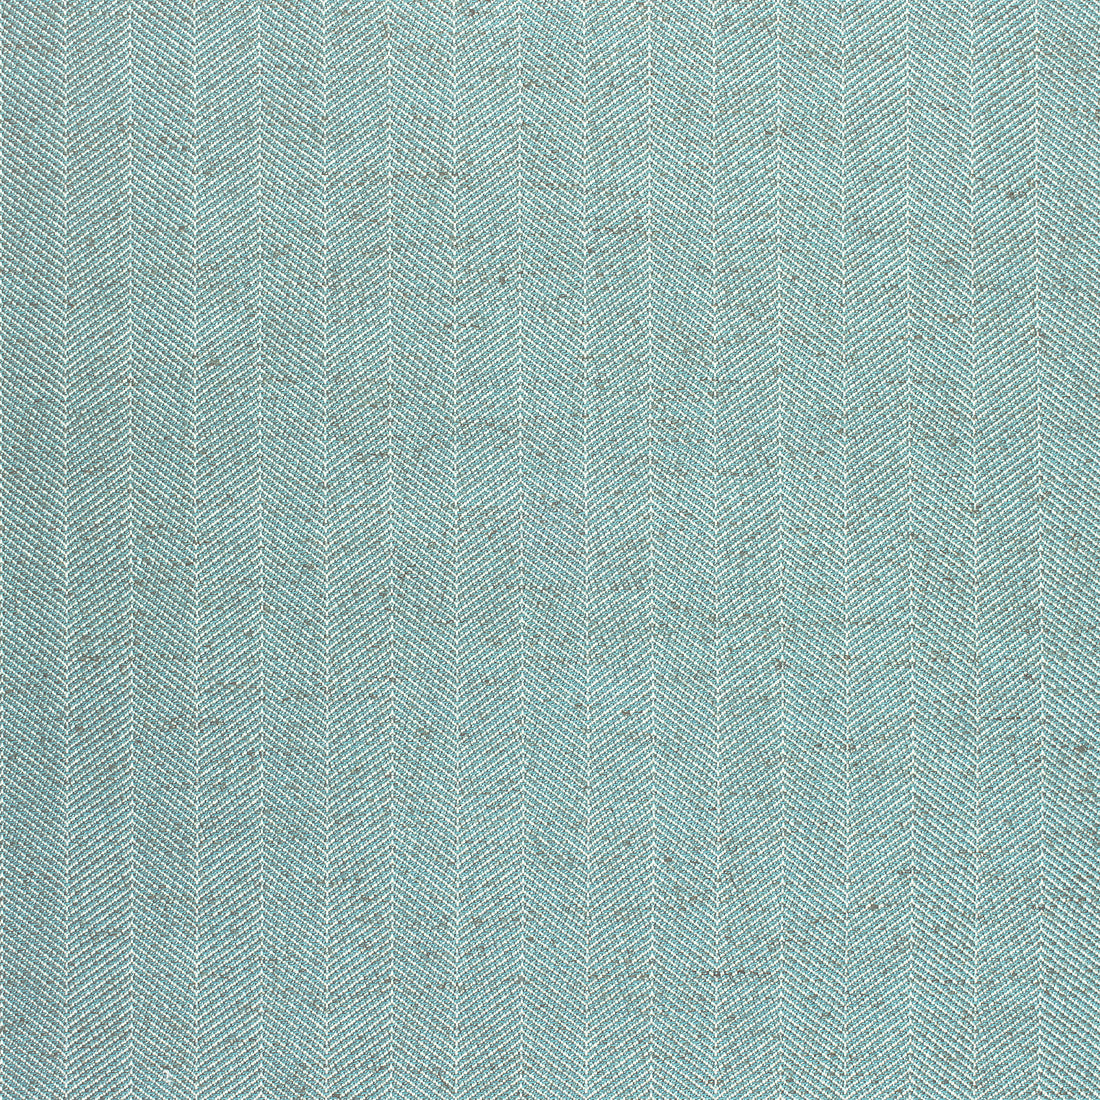 Hamilton Herringbone fabric in aqua color - pattern number W80671 - by Thibaut in the Pinnacle collection